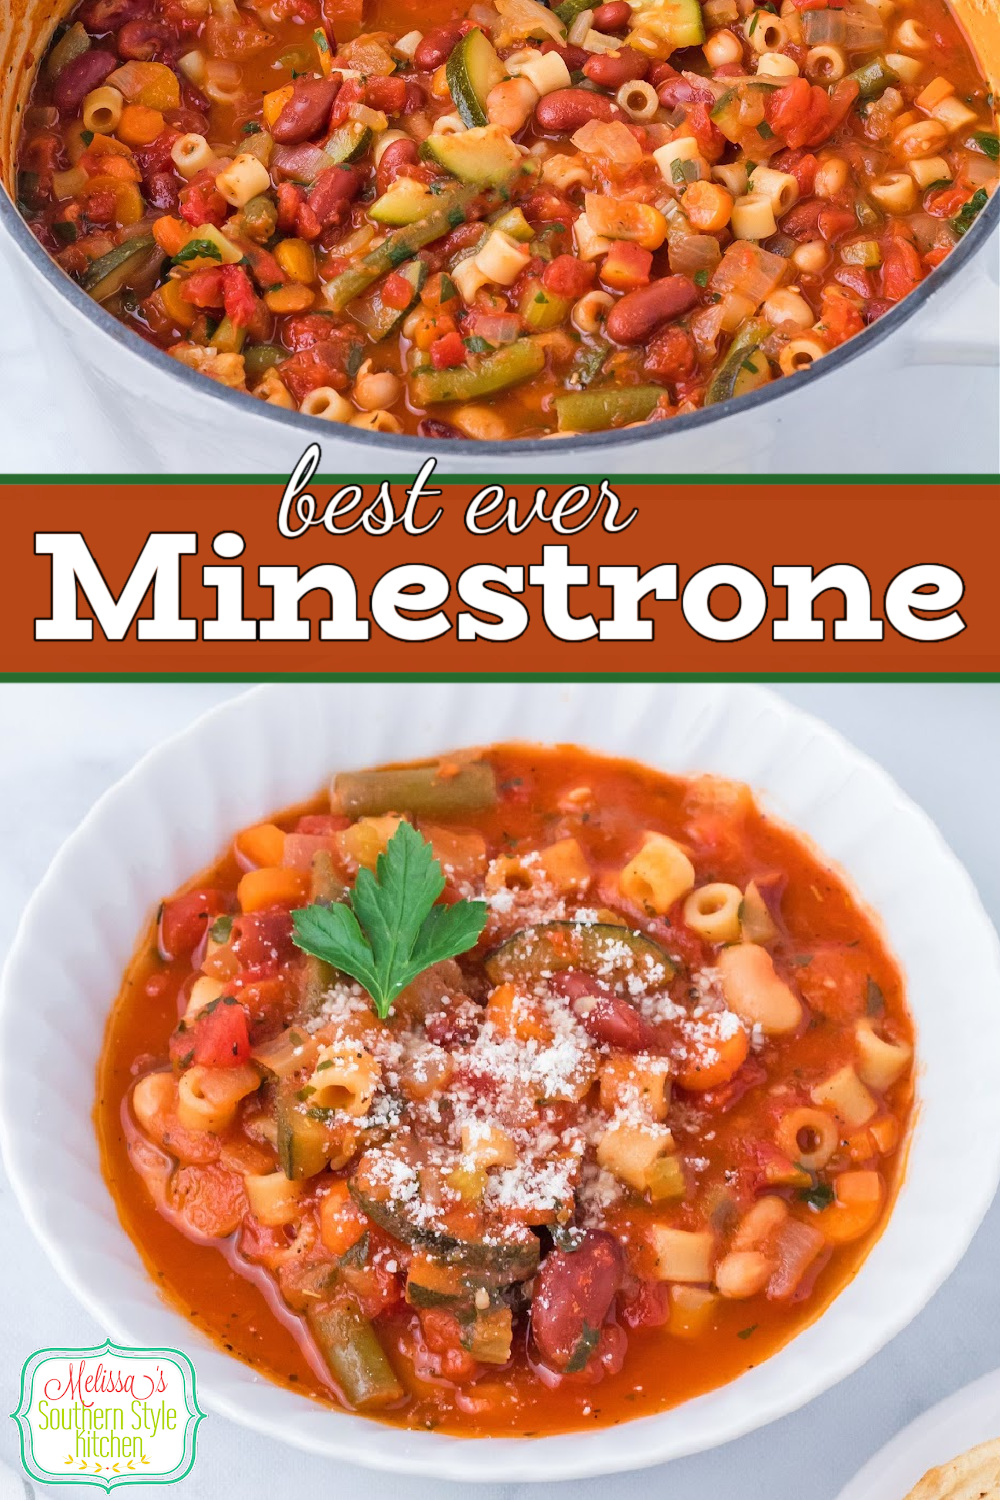 This Homemade Minestrone Recipe is packed with vibrant colors and fresh flavors making this one pot meal a winner any day of the week #minestronerecipe #easyminestrone #soup #souprecipes #meatlesssouprecipes #bestminestrone #vegetablesoup #ditilinipasta via @melissasssk